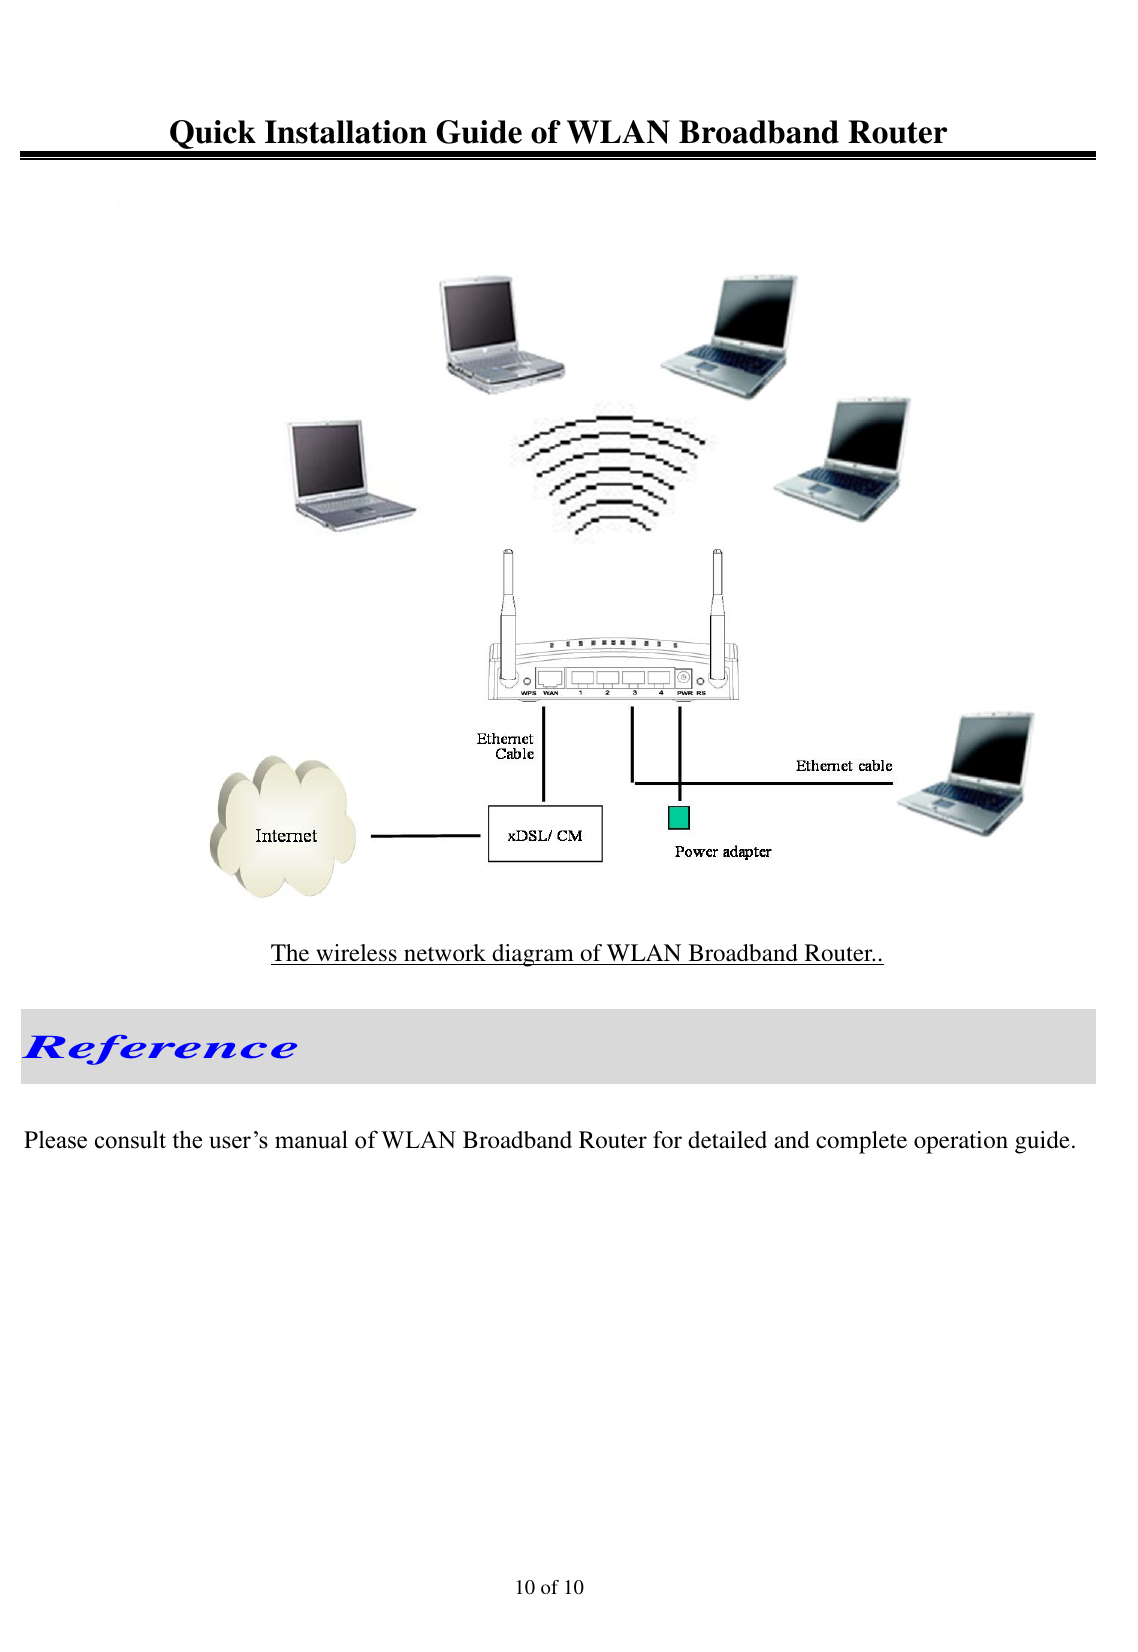 Quick Installation Guide of WLAN Broadband Router 10 of 10 The wireless network diagram of WLAN Broadband Router.. Reference Please consult the user’s manual of WLAN Broadband Router for detailed and complete operation guide. 